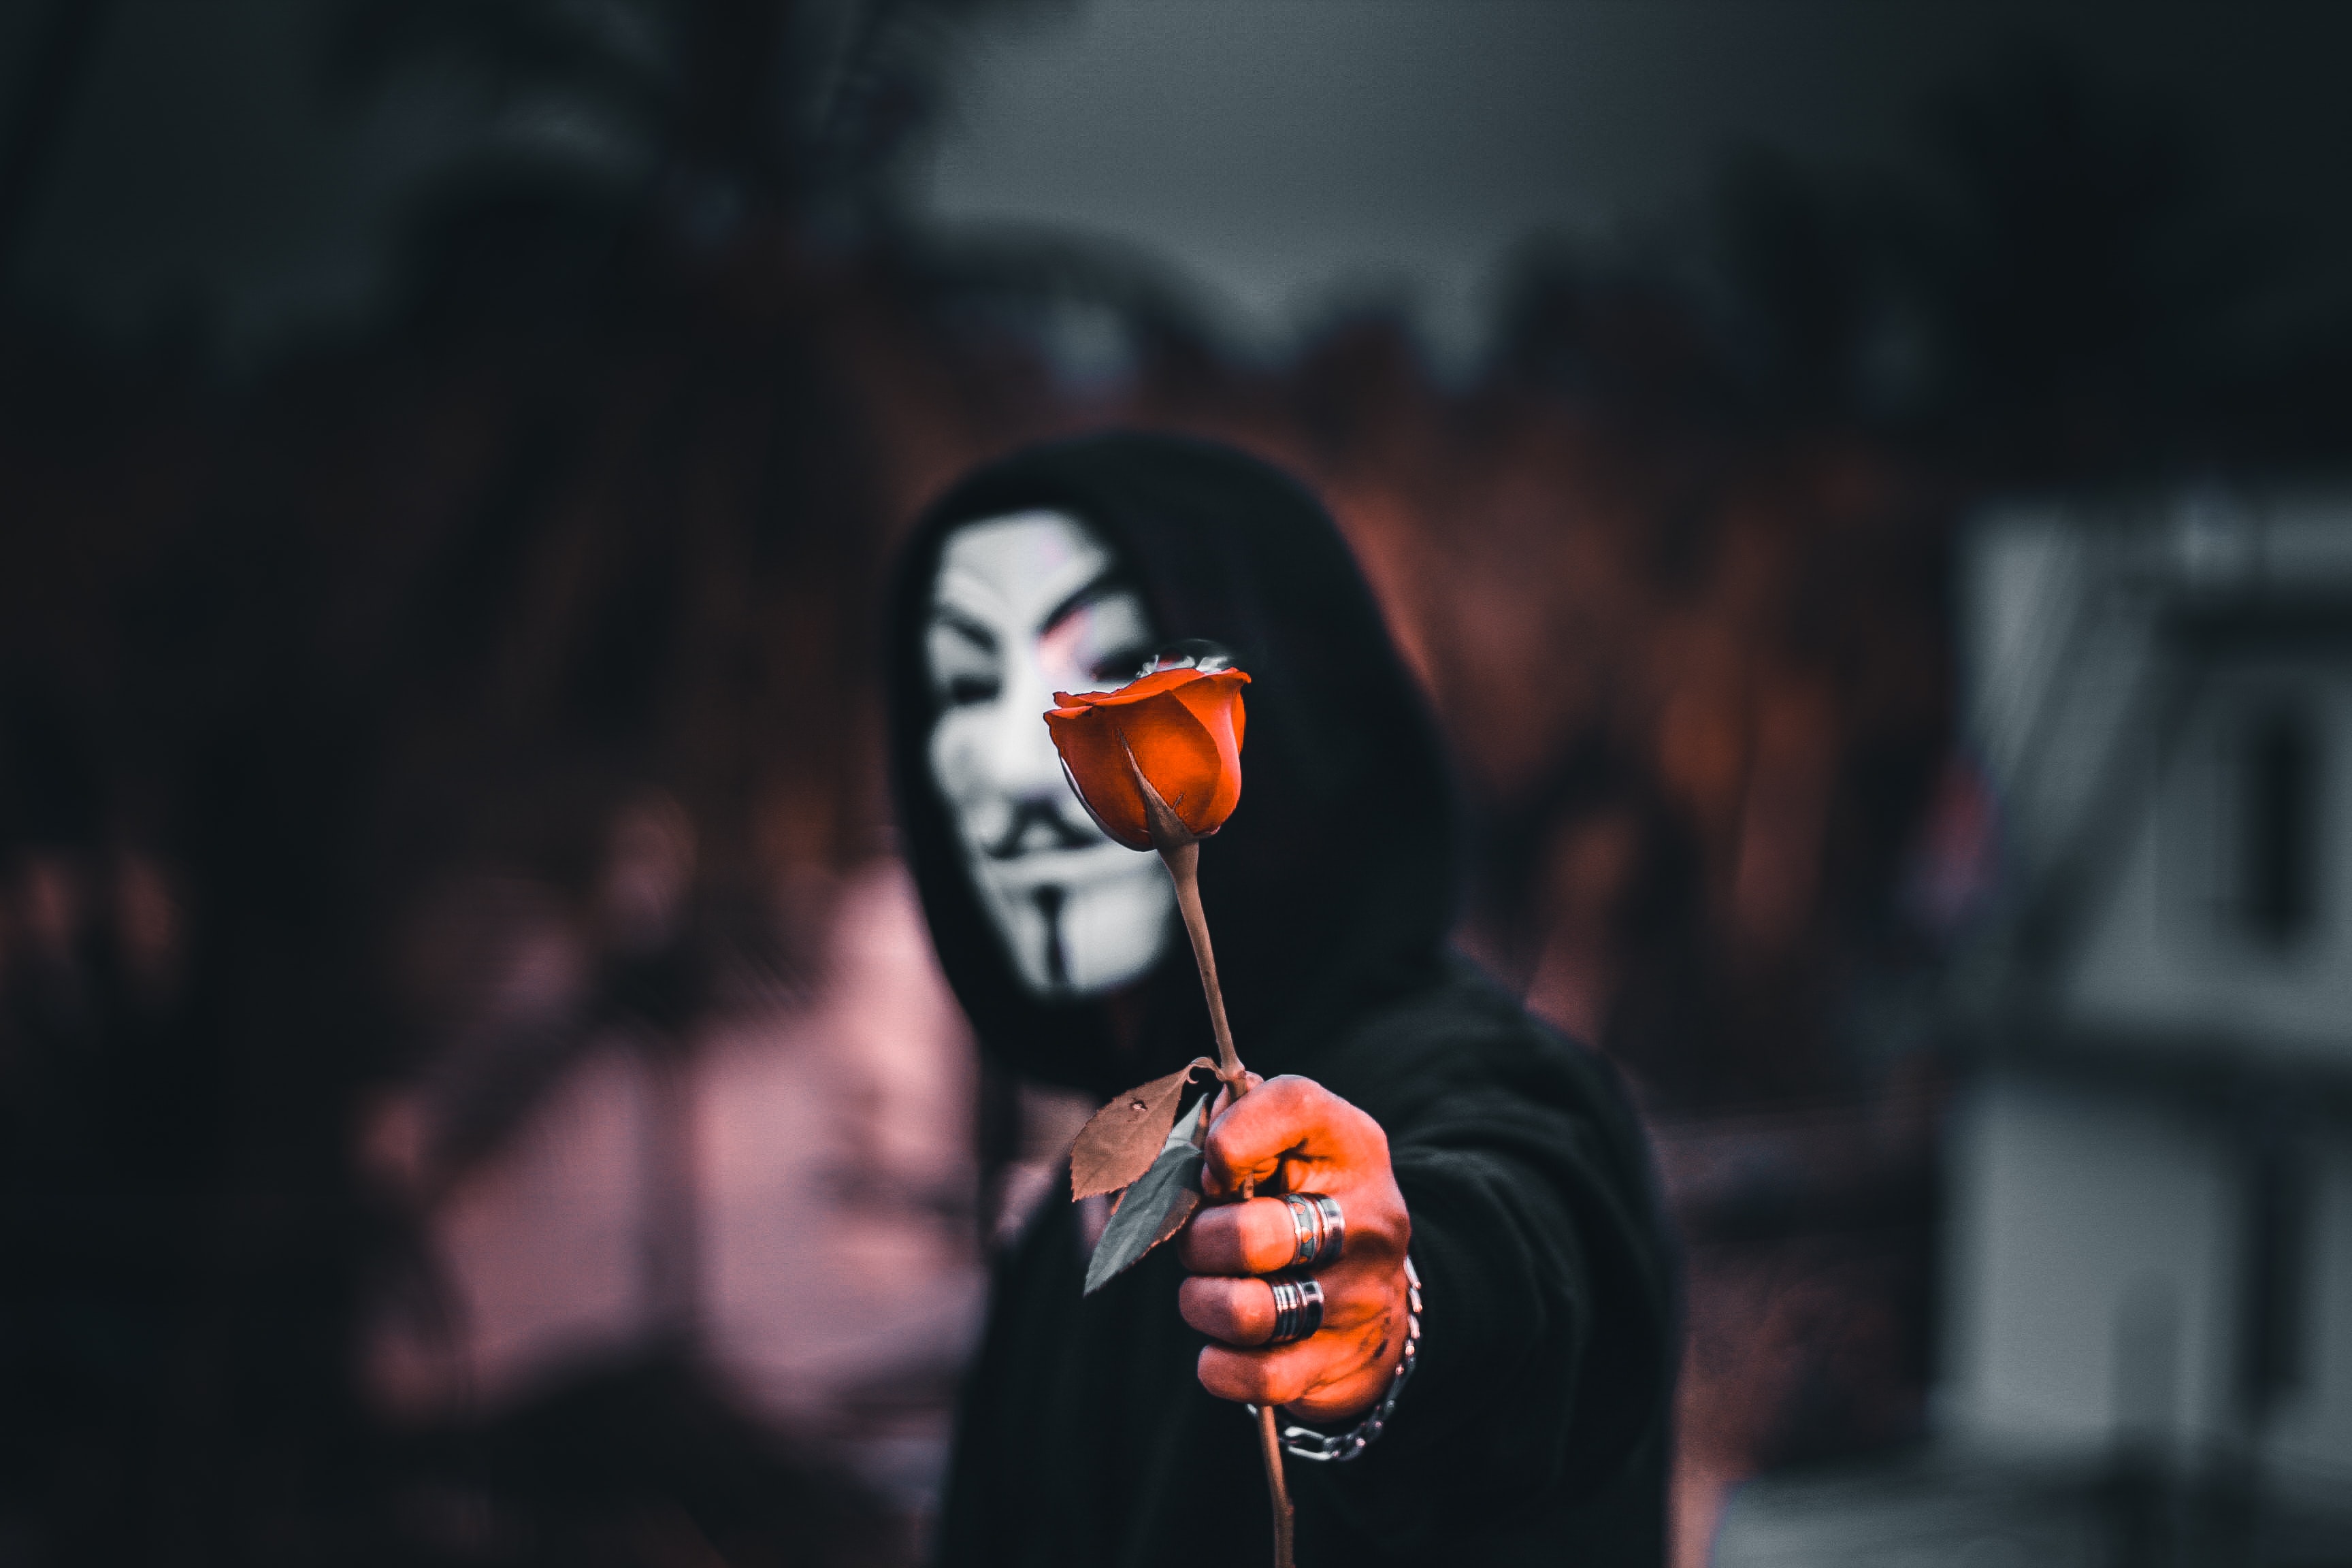 anonymous, mask, hood, rose flower, miscellanea, flower, miscellaneous, rose images